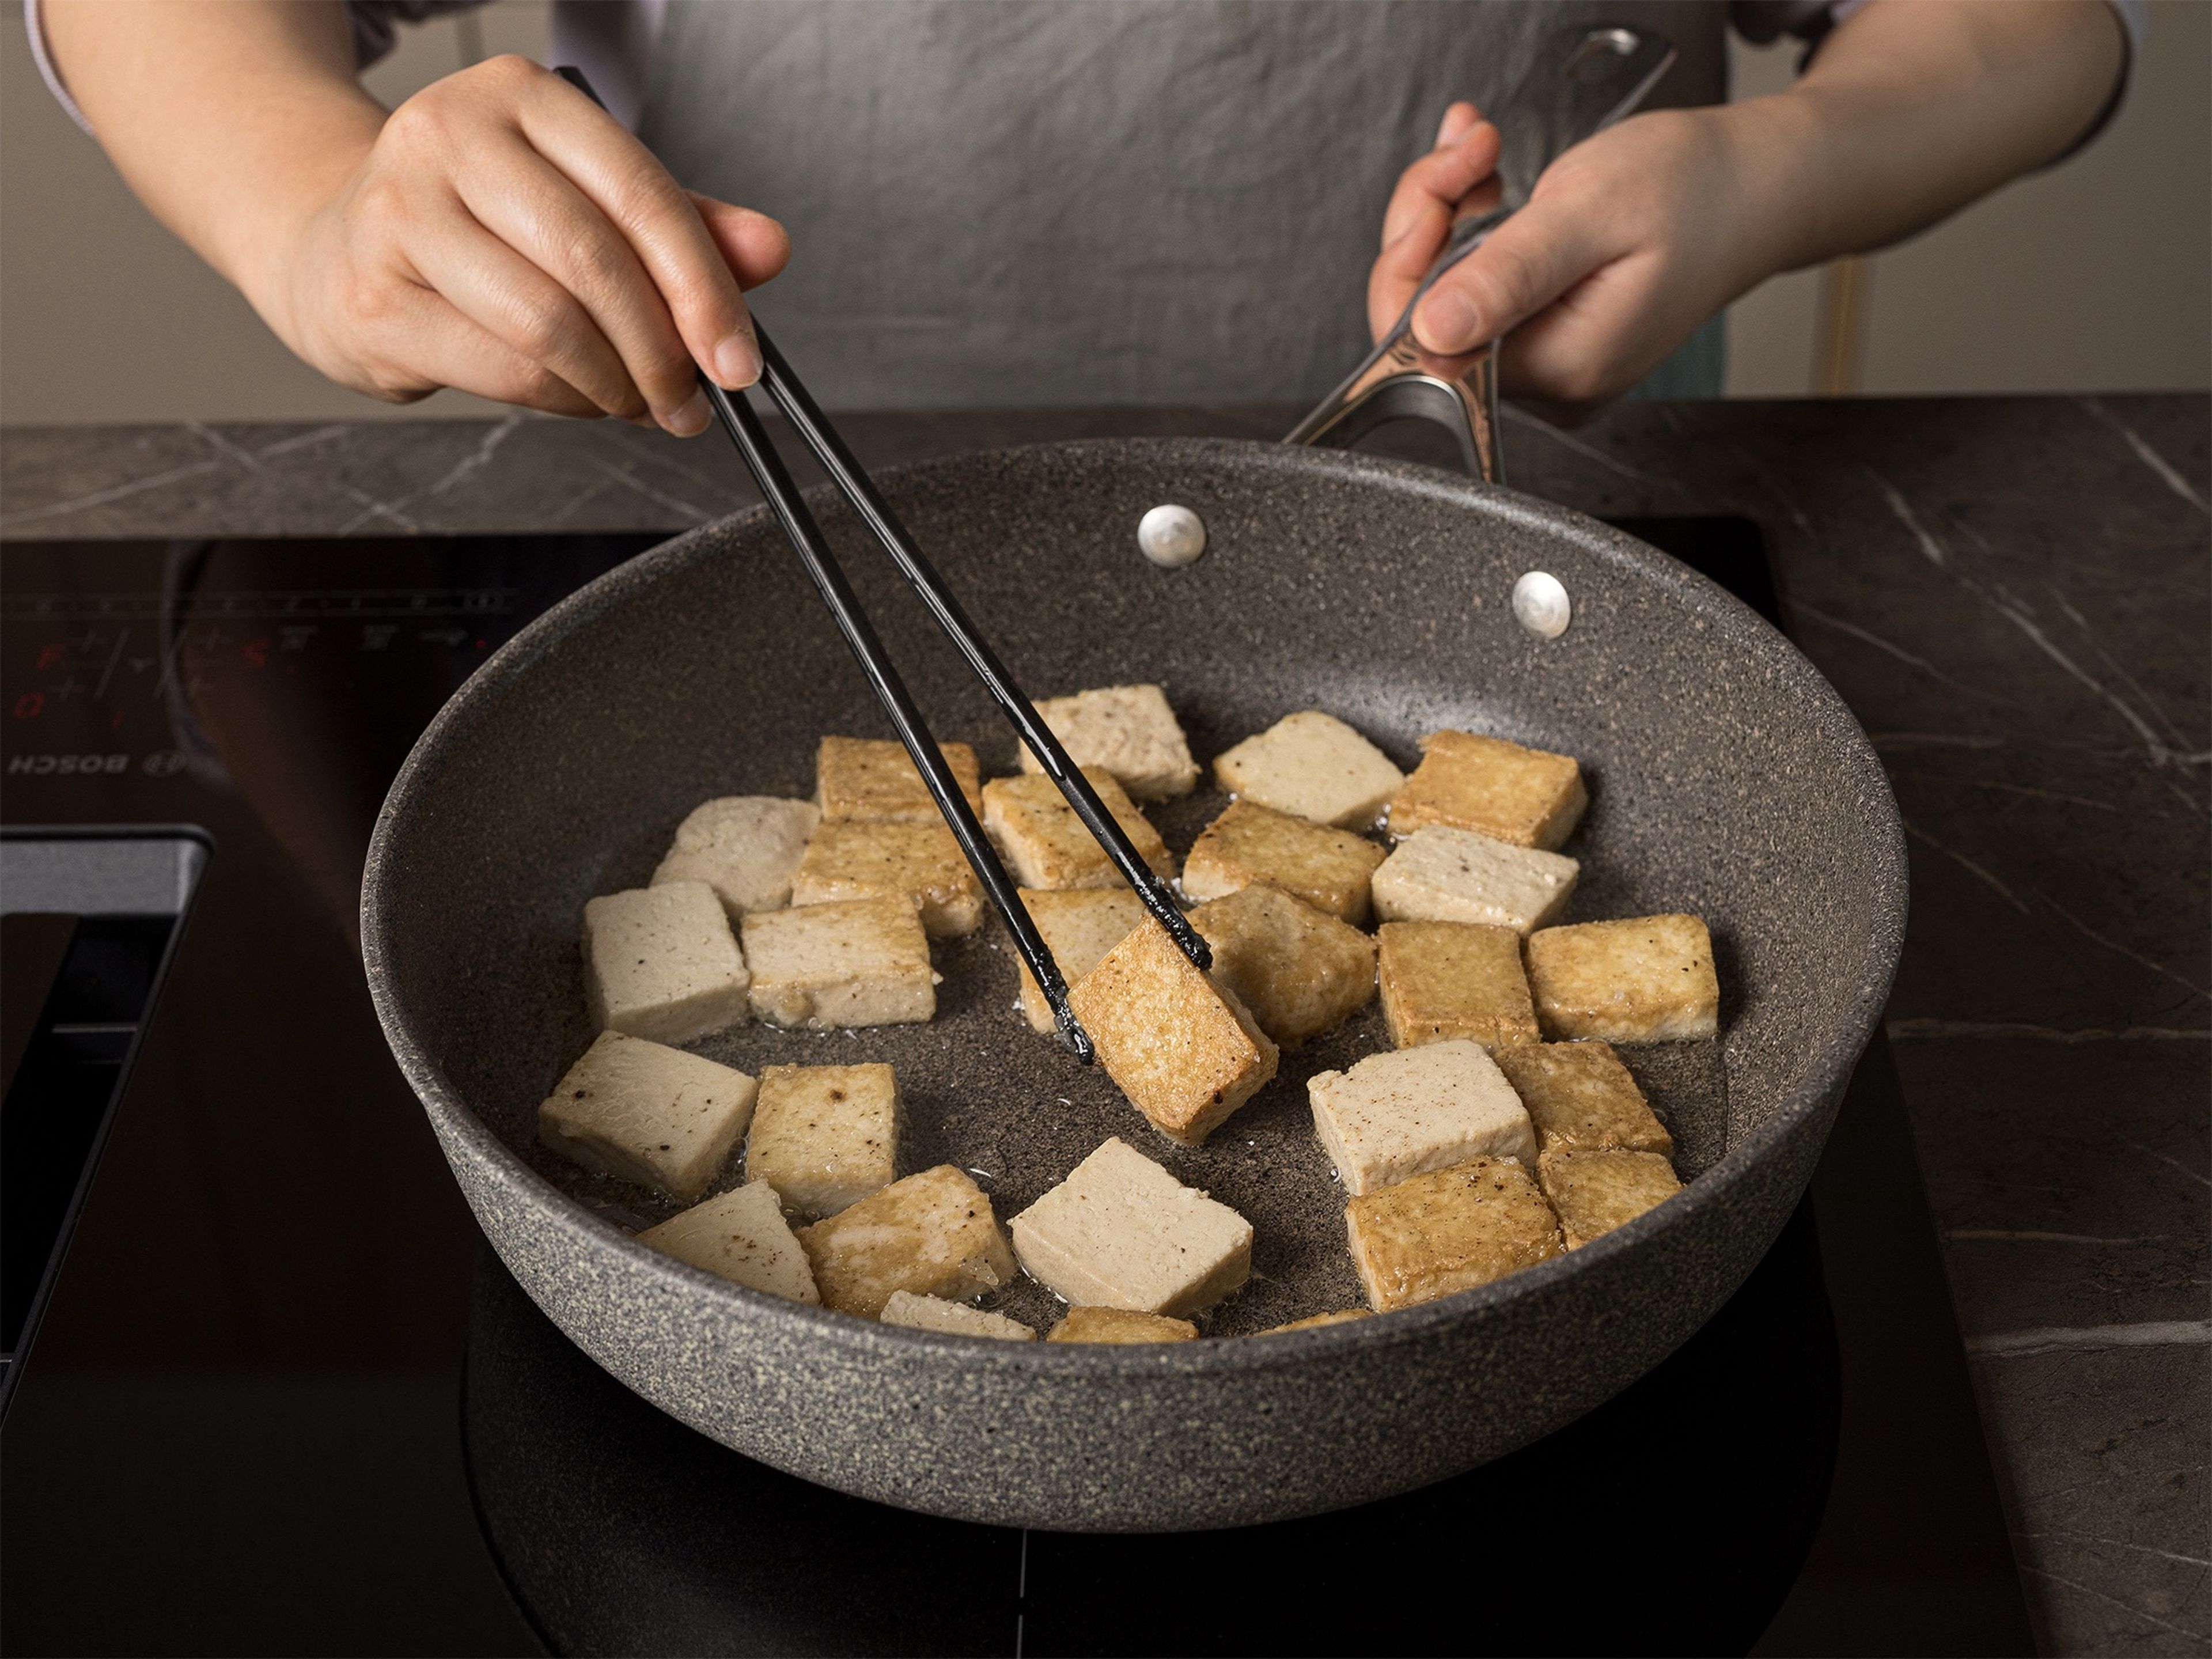 In a big non-stick frying pan, heat oil over medium-high heat. Add the tofu cubes in a single layer, let them cook until the bottom is golden brown, then turn and fry them on the other side (approx. 5 min. each side). Remove and set aside. In the same pan, add the sauce and let it simmer for approx. 3–5 min., until it thickens. Reserve half of the sauce for the noodles. Add the tofu cubes to the remaining sauce, mix to combine until the tofu is coated with the glaze.